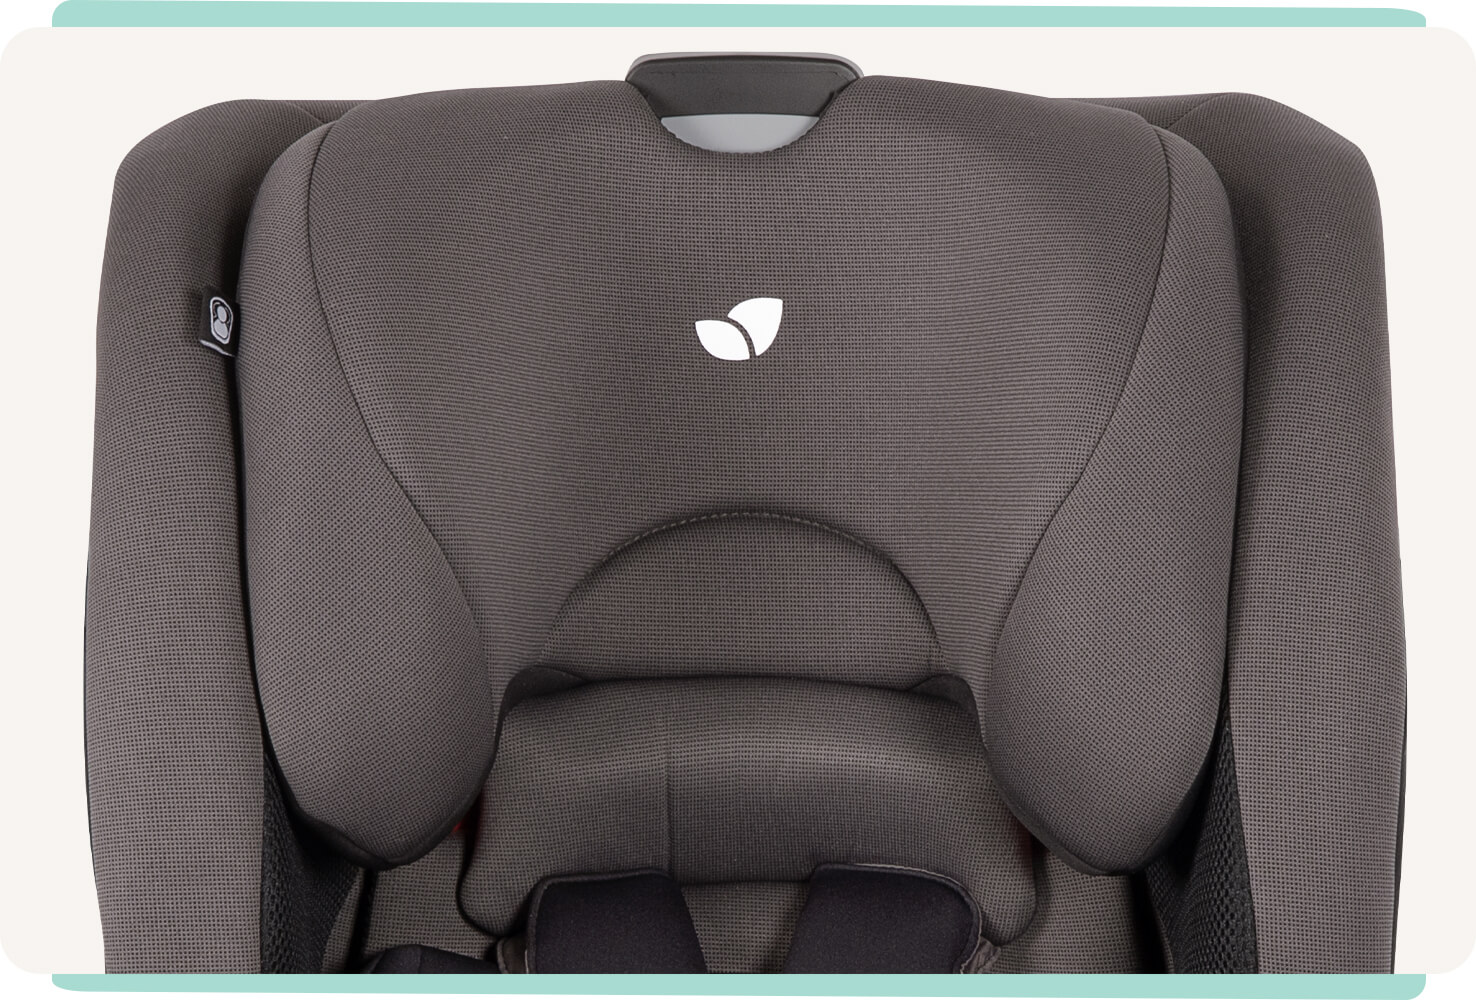 Close-up of the headrest on a dark gray Joie bold R toddler car seat.